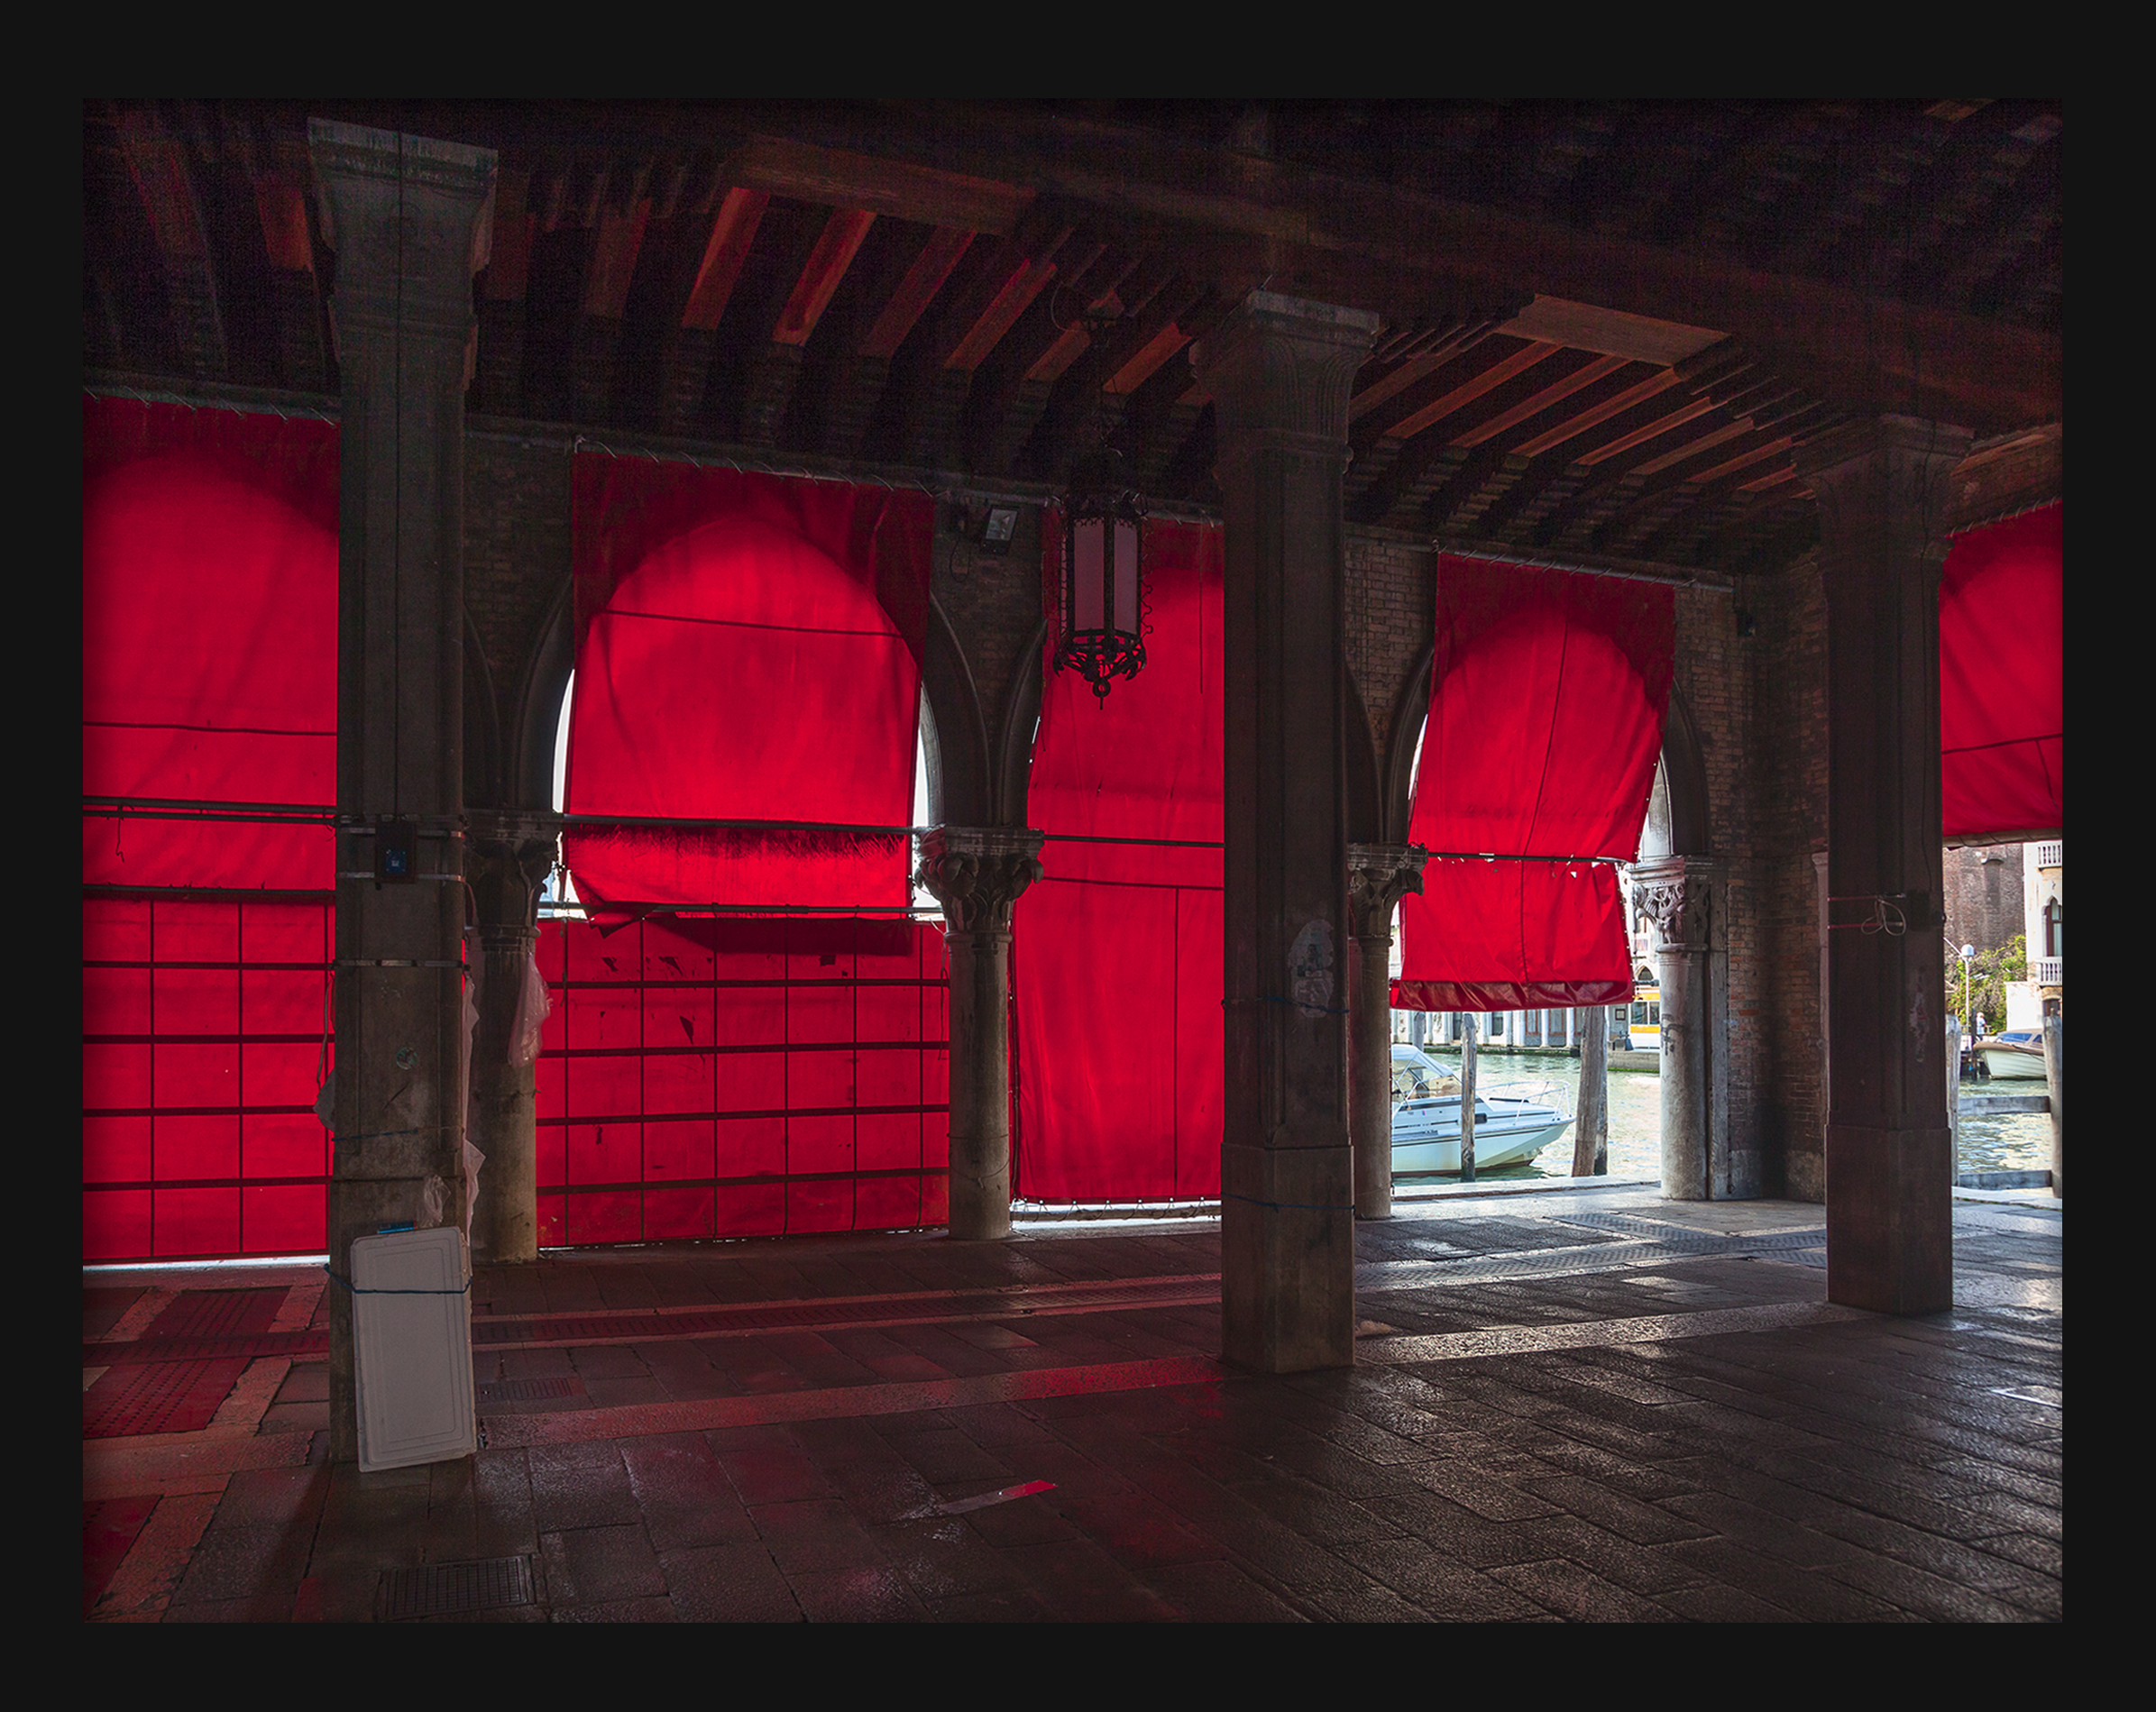 Immerse yourself in the calming yet vibrant ambiance of Venice, beautifully captured through the red hues of a picturesque warehouse that embodies tranquility and style.